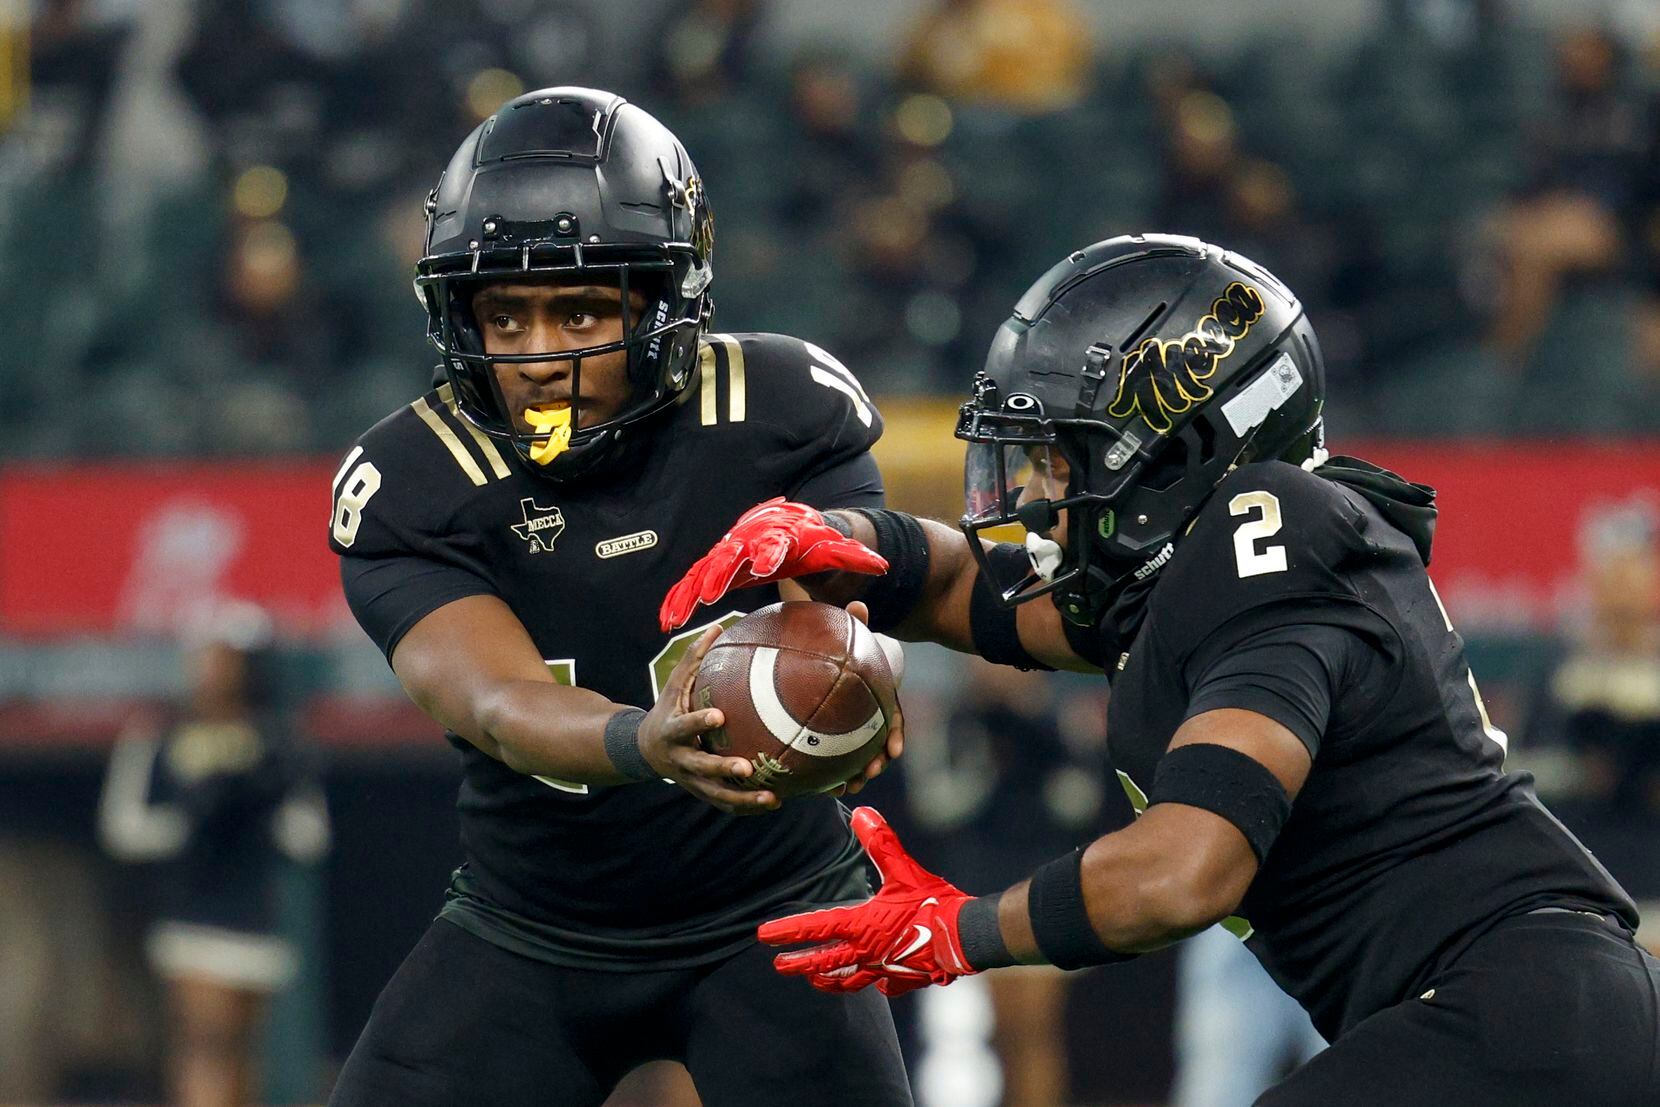 South Oak Cliff quarterback William Little (18) hands the ball to South Oak Cliff running...